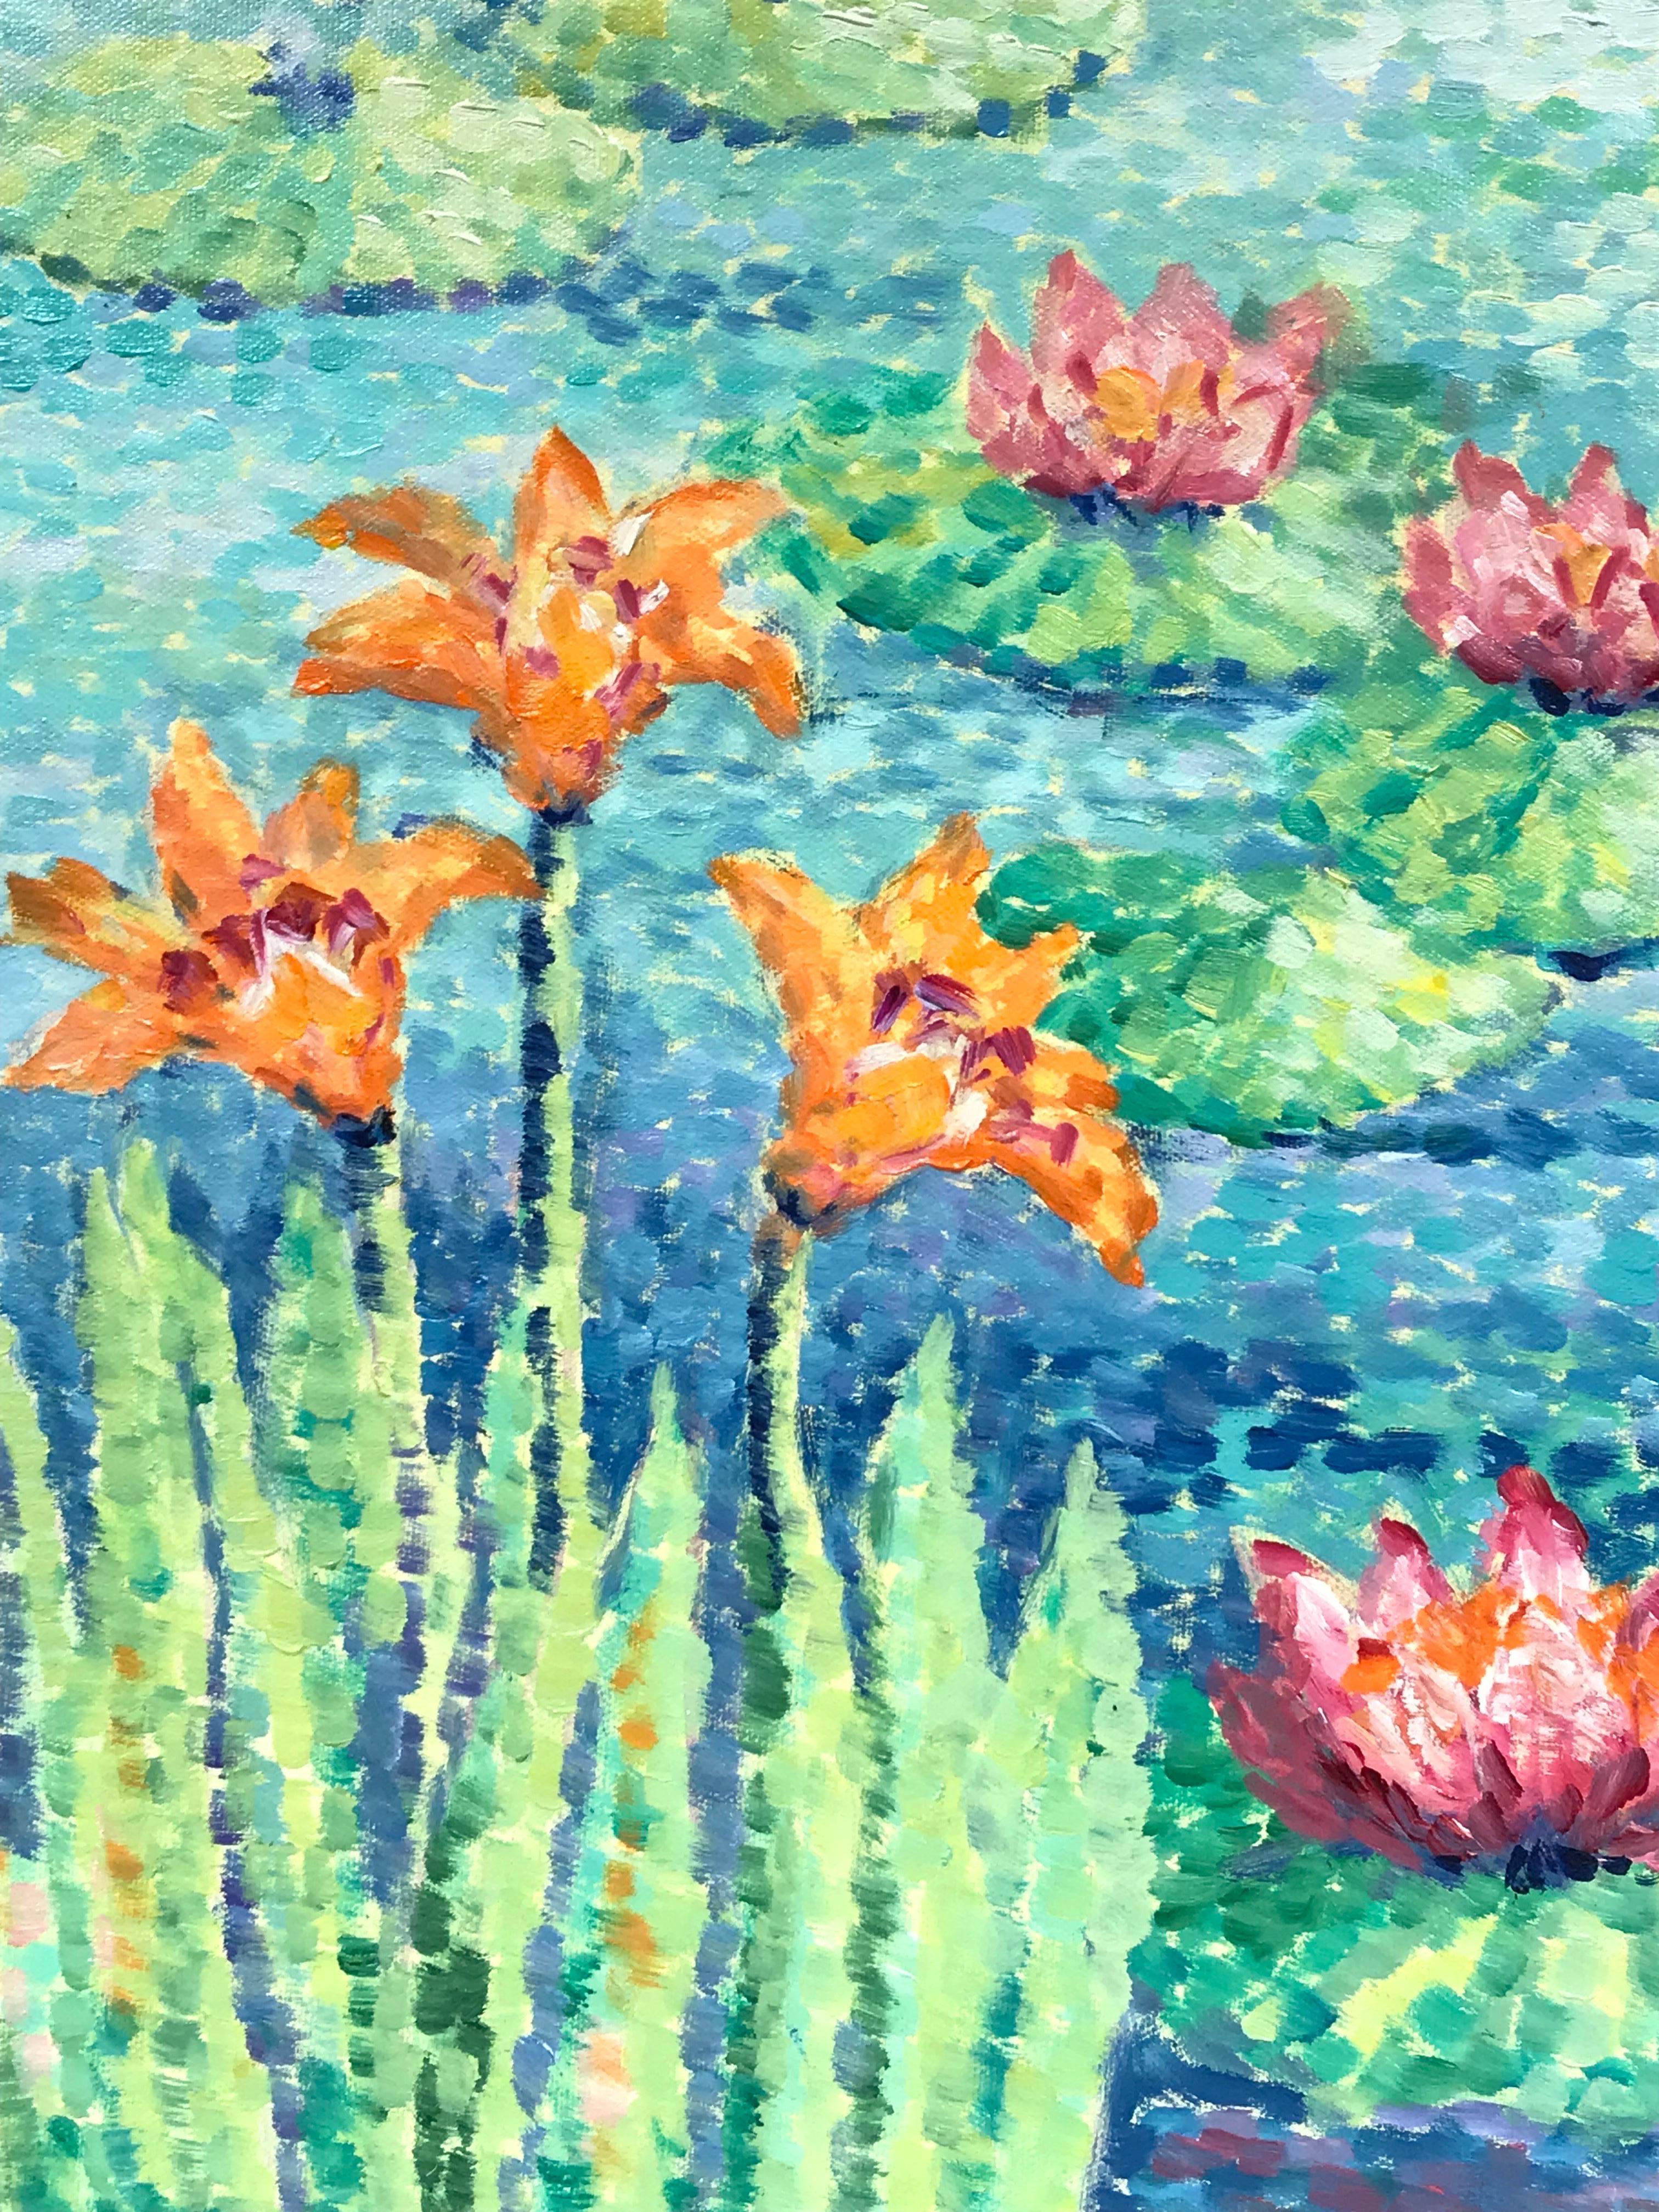 Waterlily Pond Bright & Colorful Pointillist Oil Painting - Blue Landscape Painting by Maggy Clarysse